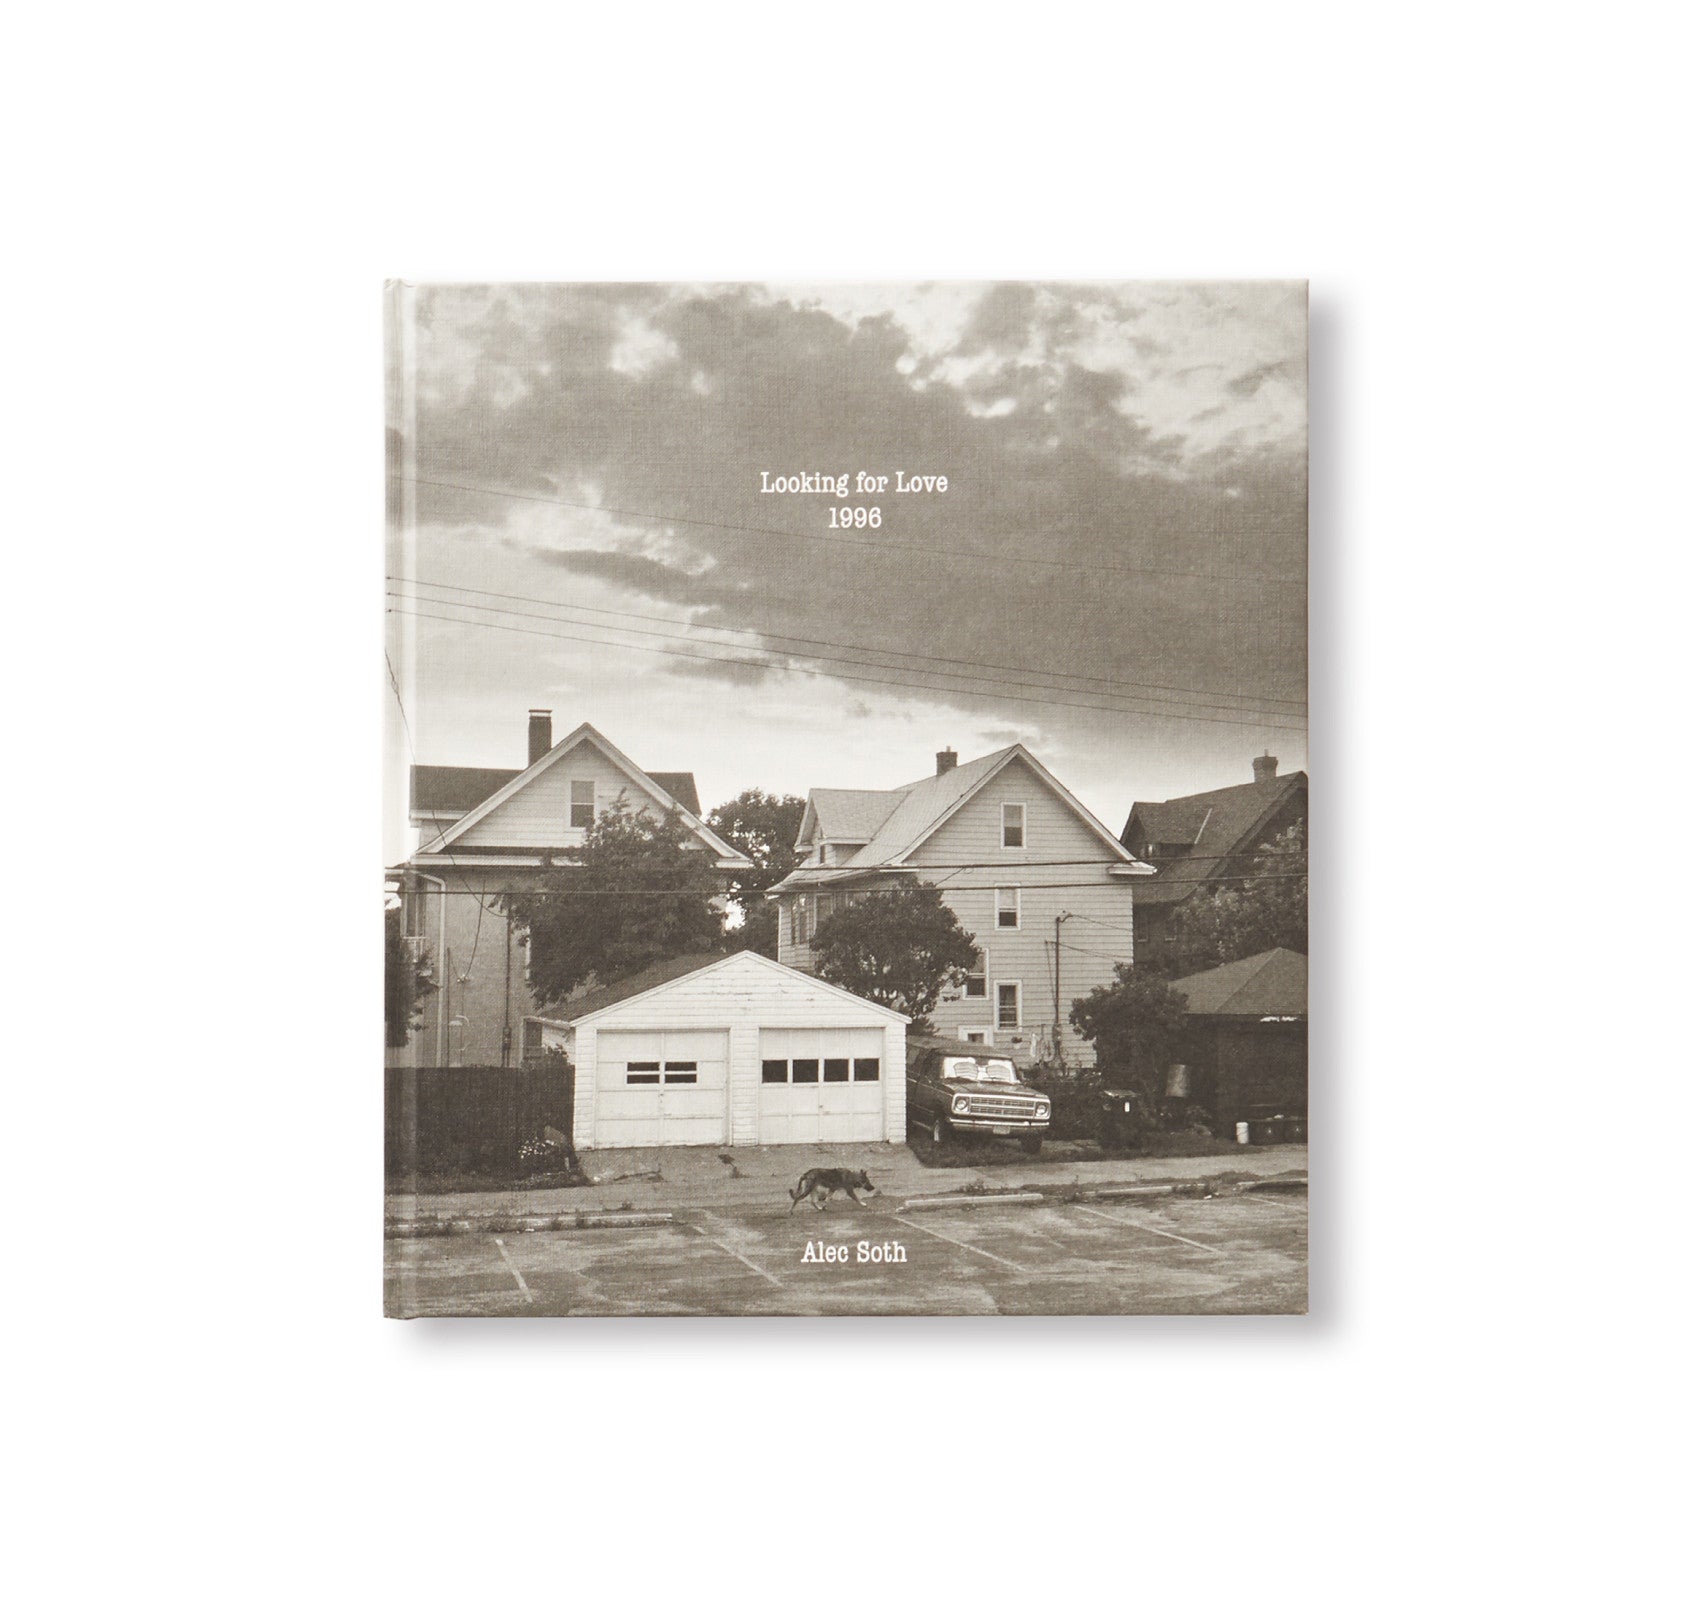 LOOKING FOR LOVE, 1996 by Alec Soth [SPECIAL EDITION]